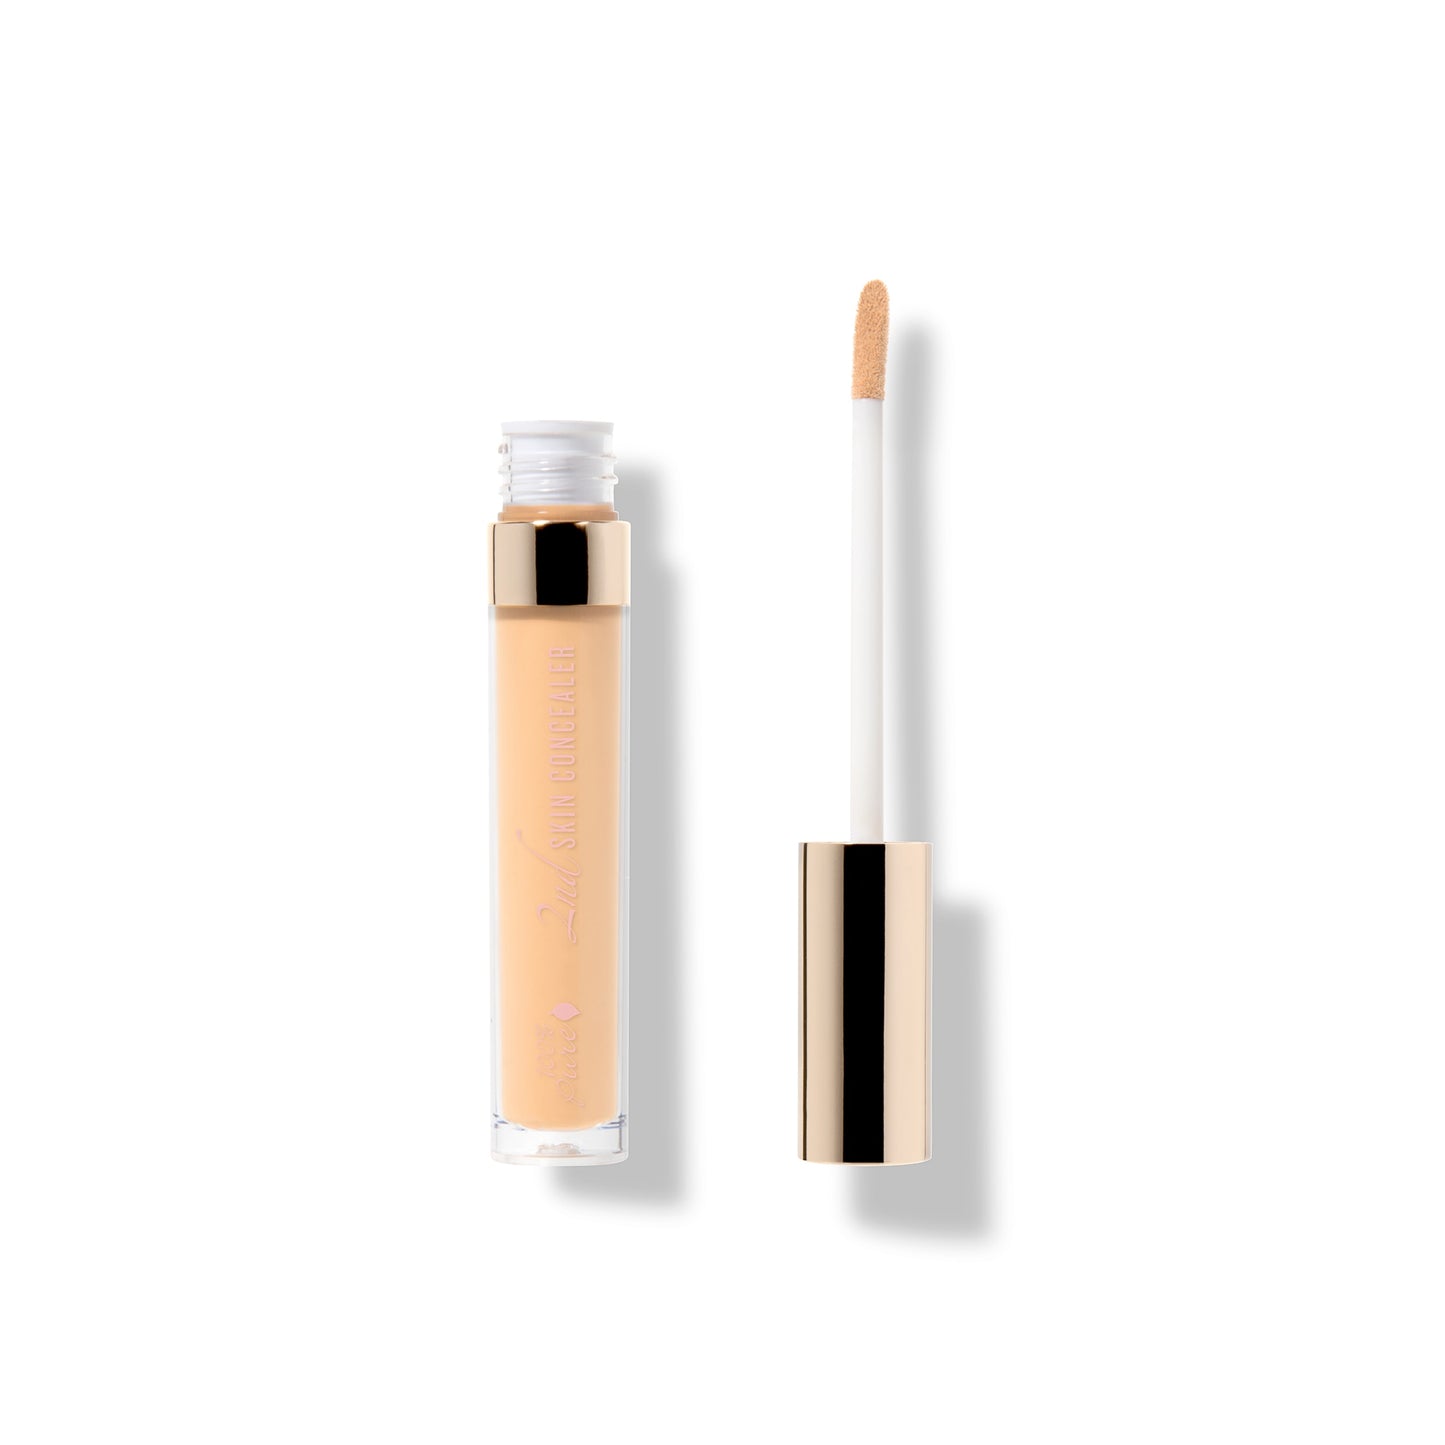 100% PURE Fruit Pigmented 2nd Skin Concealer shade 1